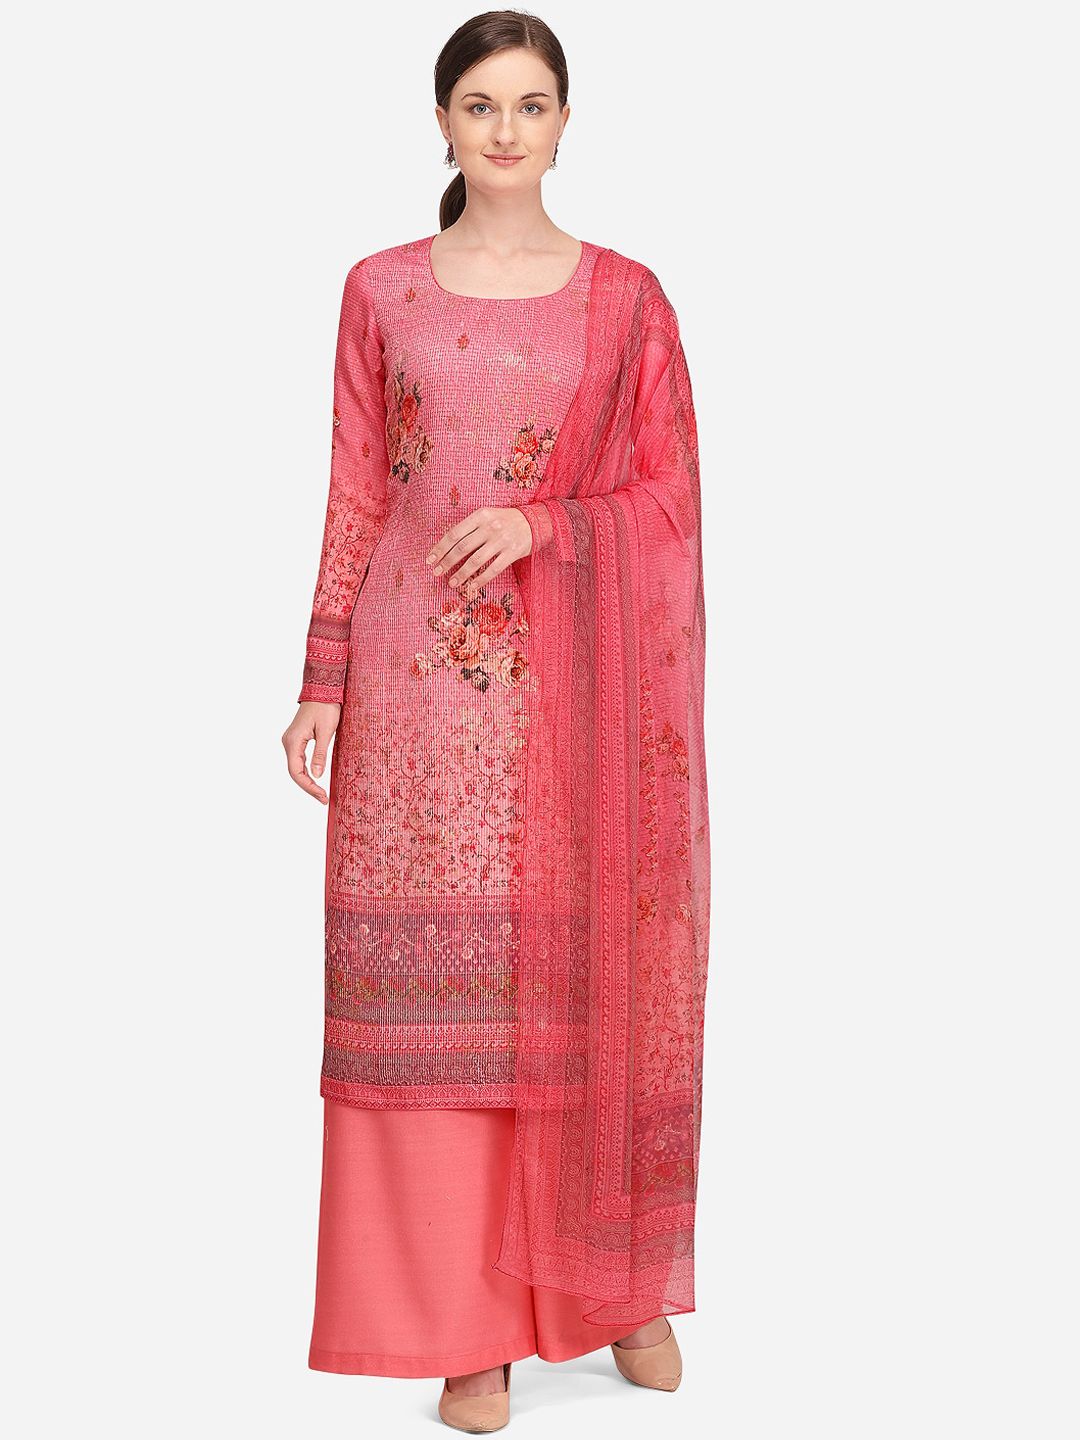 Stylee LIFESTYLE Women Pink Printed Unstitched Dress Material Price in India